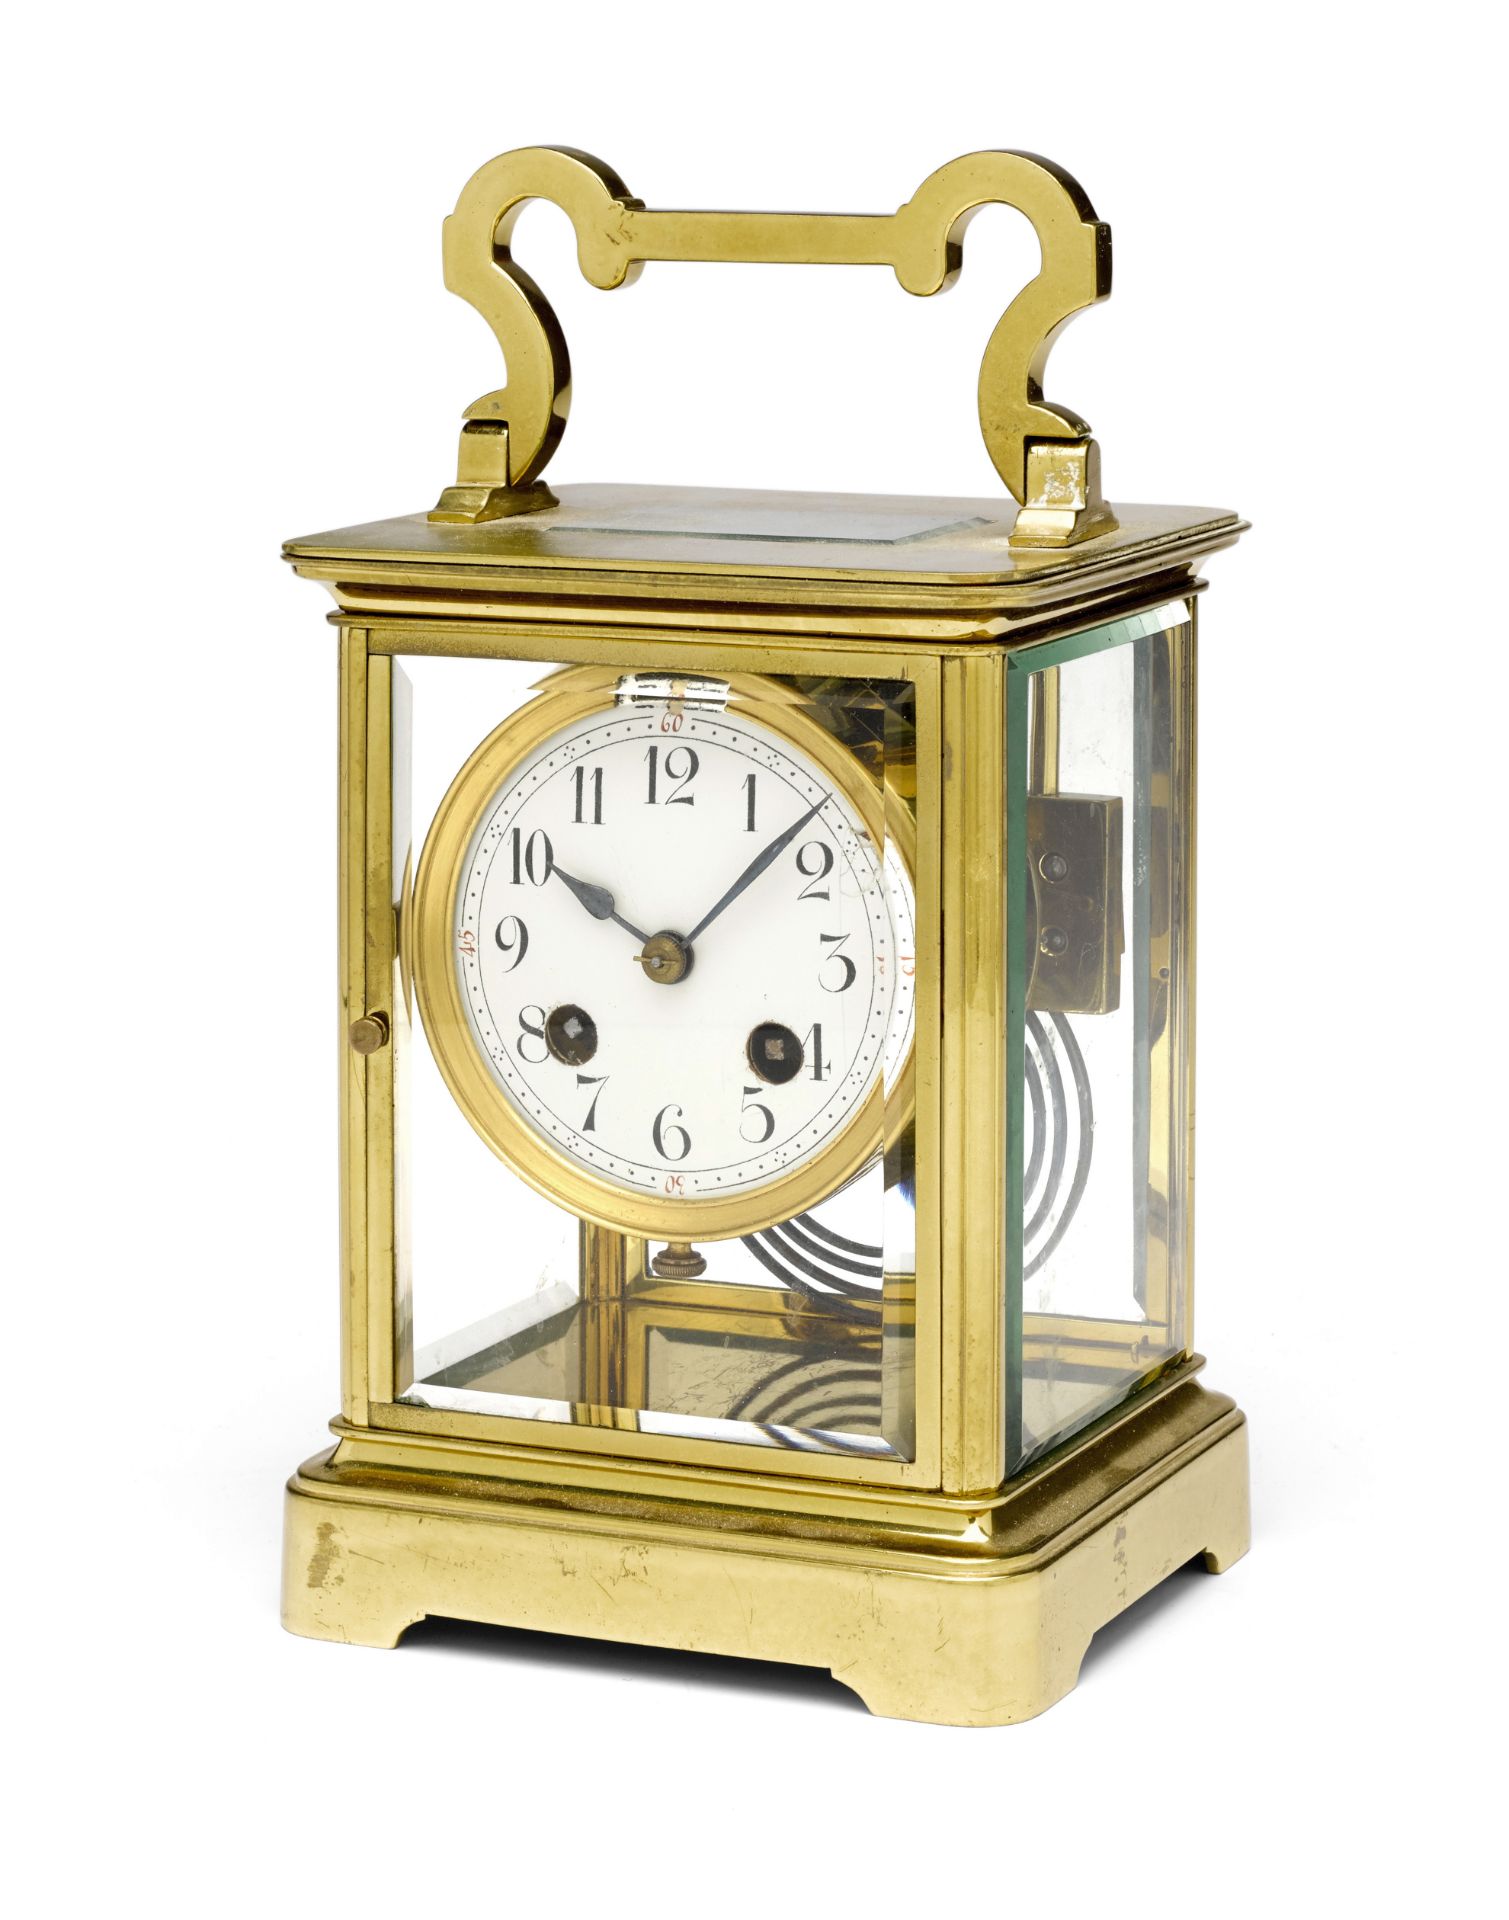 An large early 20th century brass four-glass corniche carriage clock